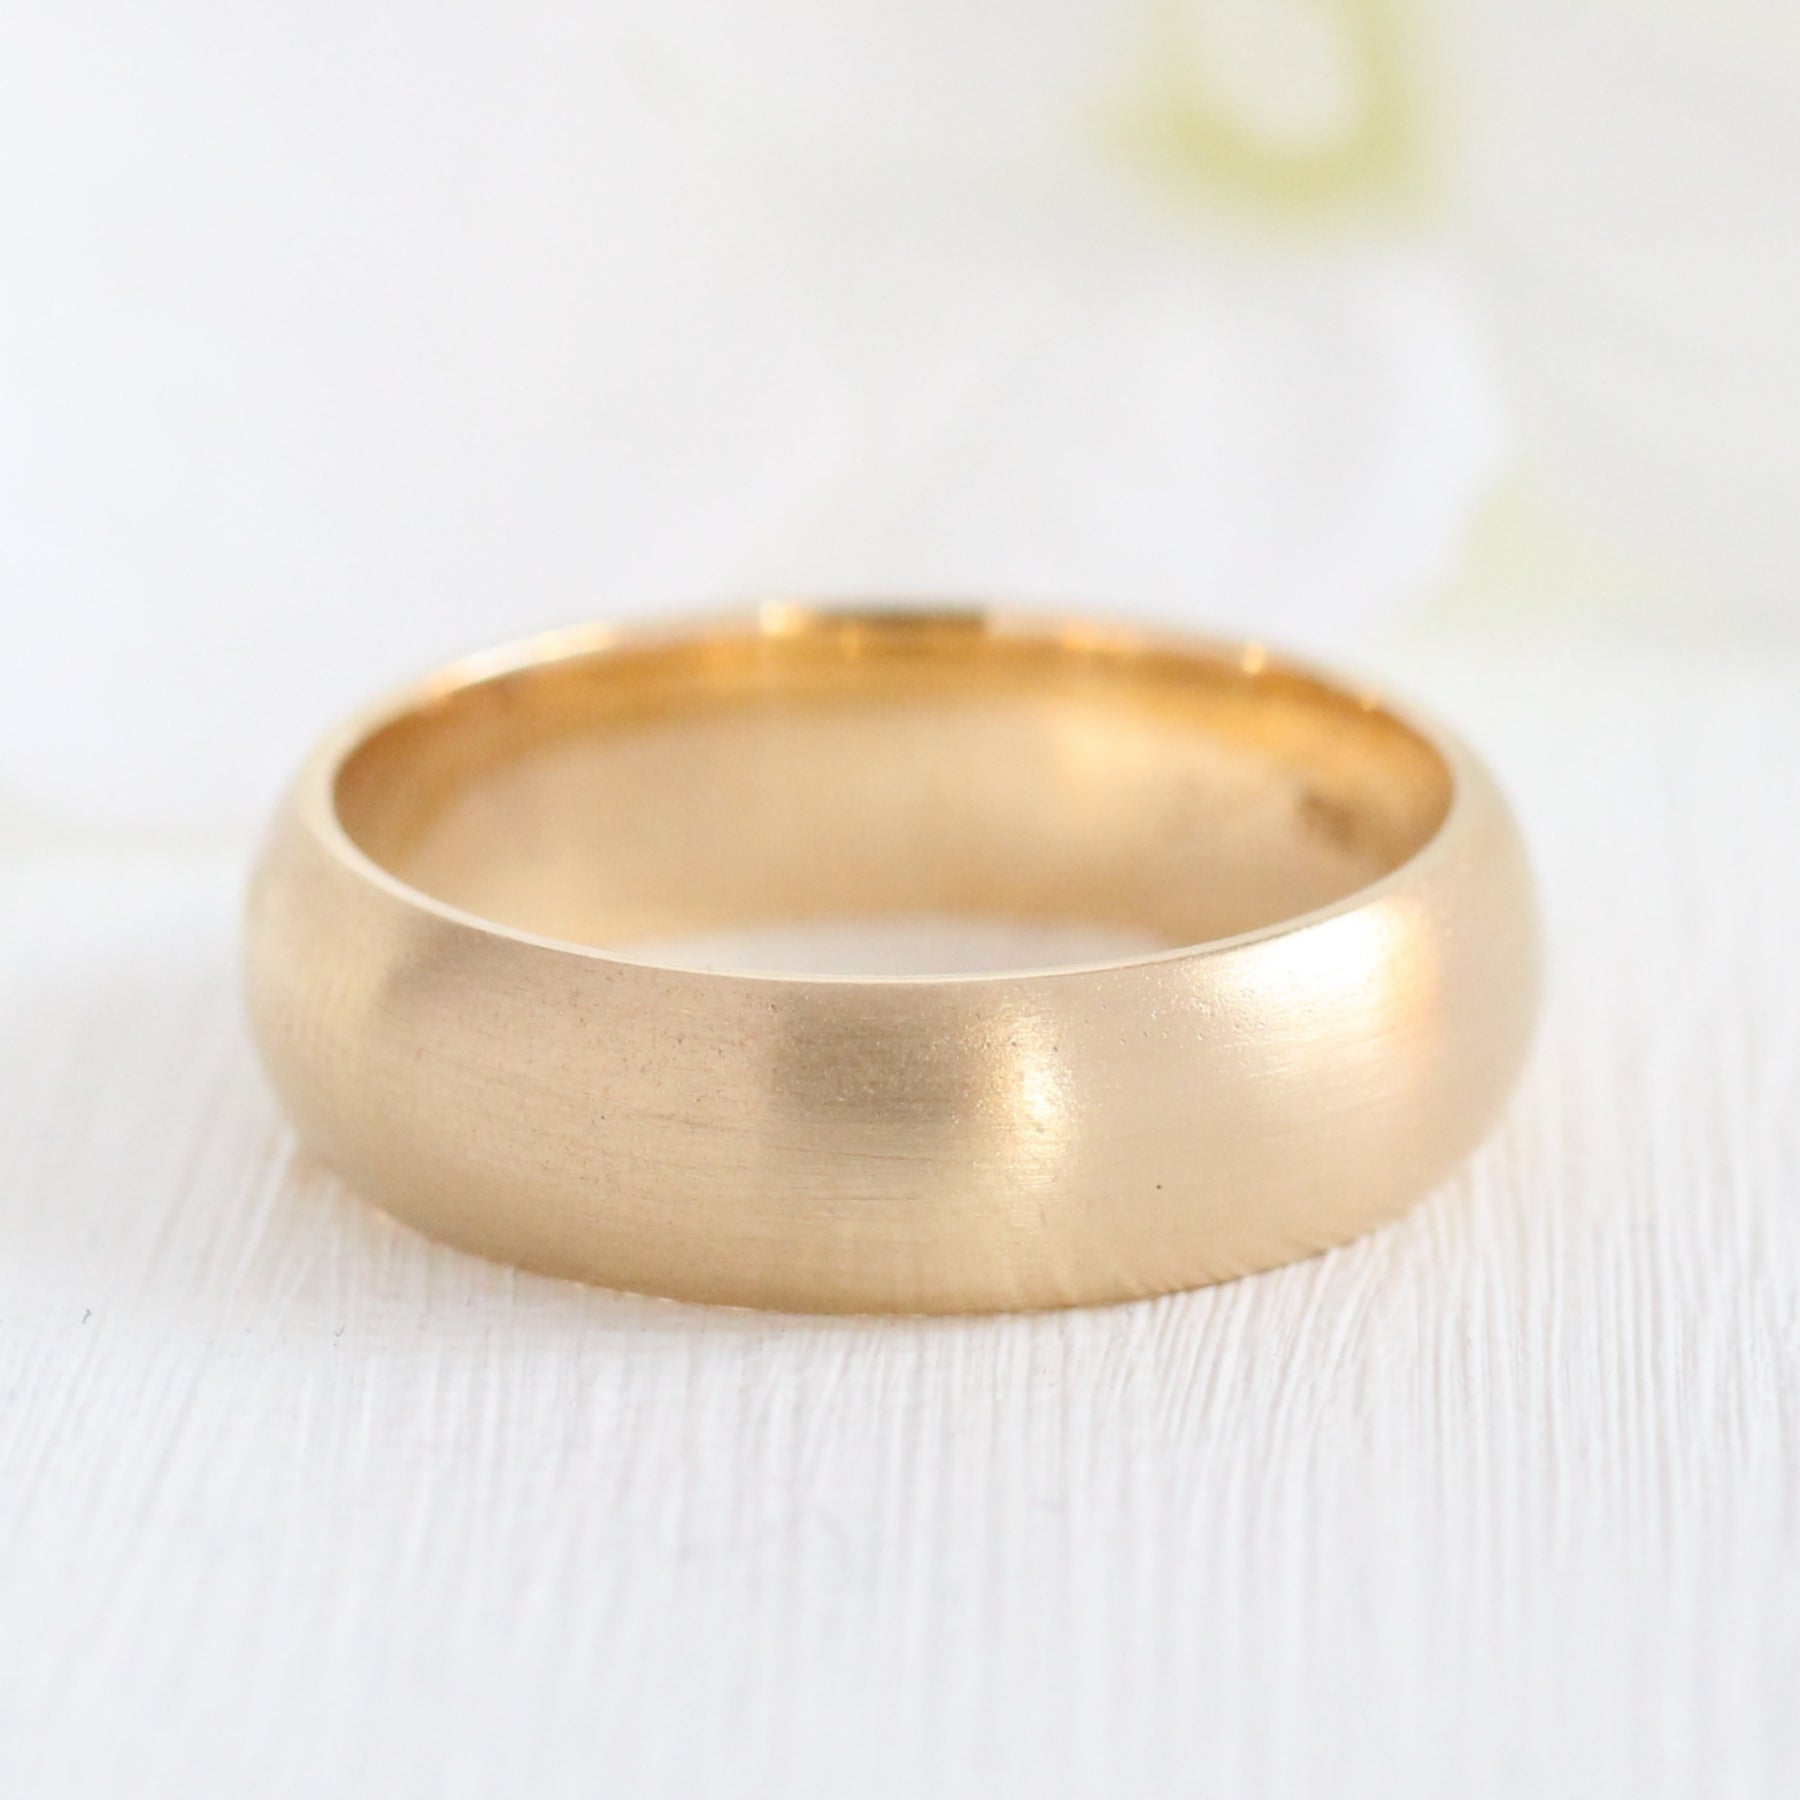 Mens wedding ring yellow gold domed wedding band matte finish gold ring la more design jewelry